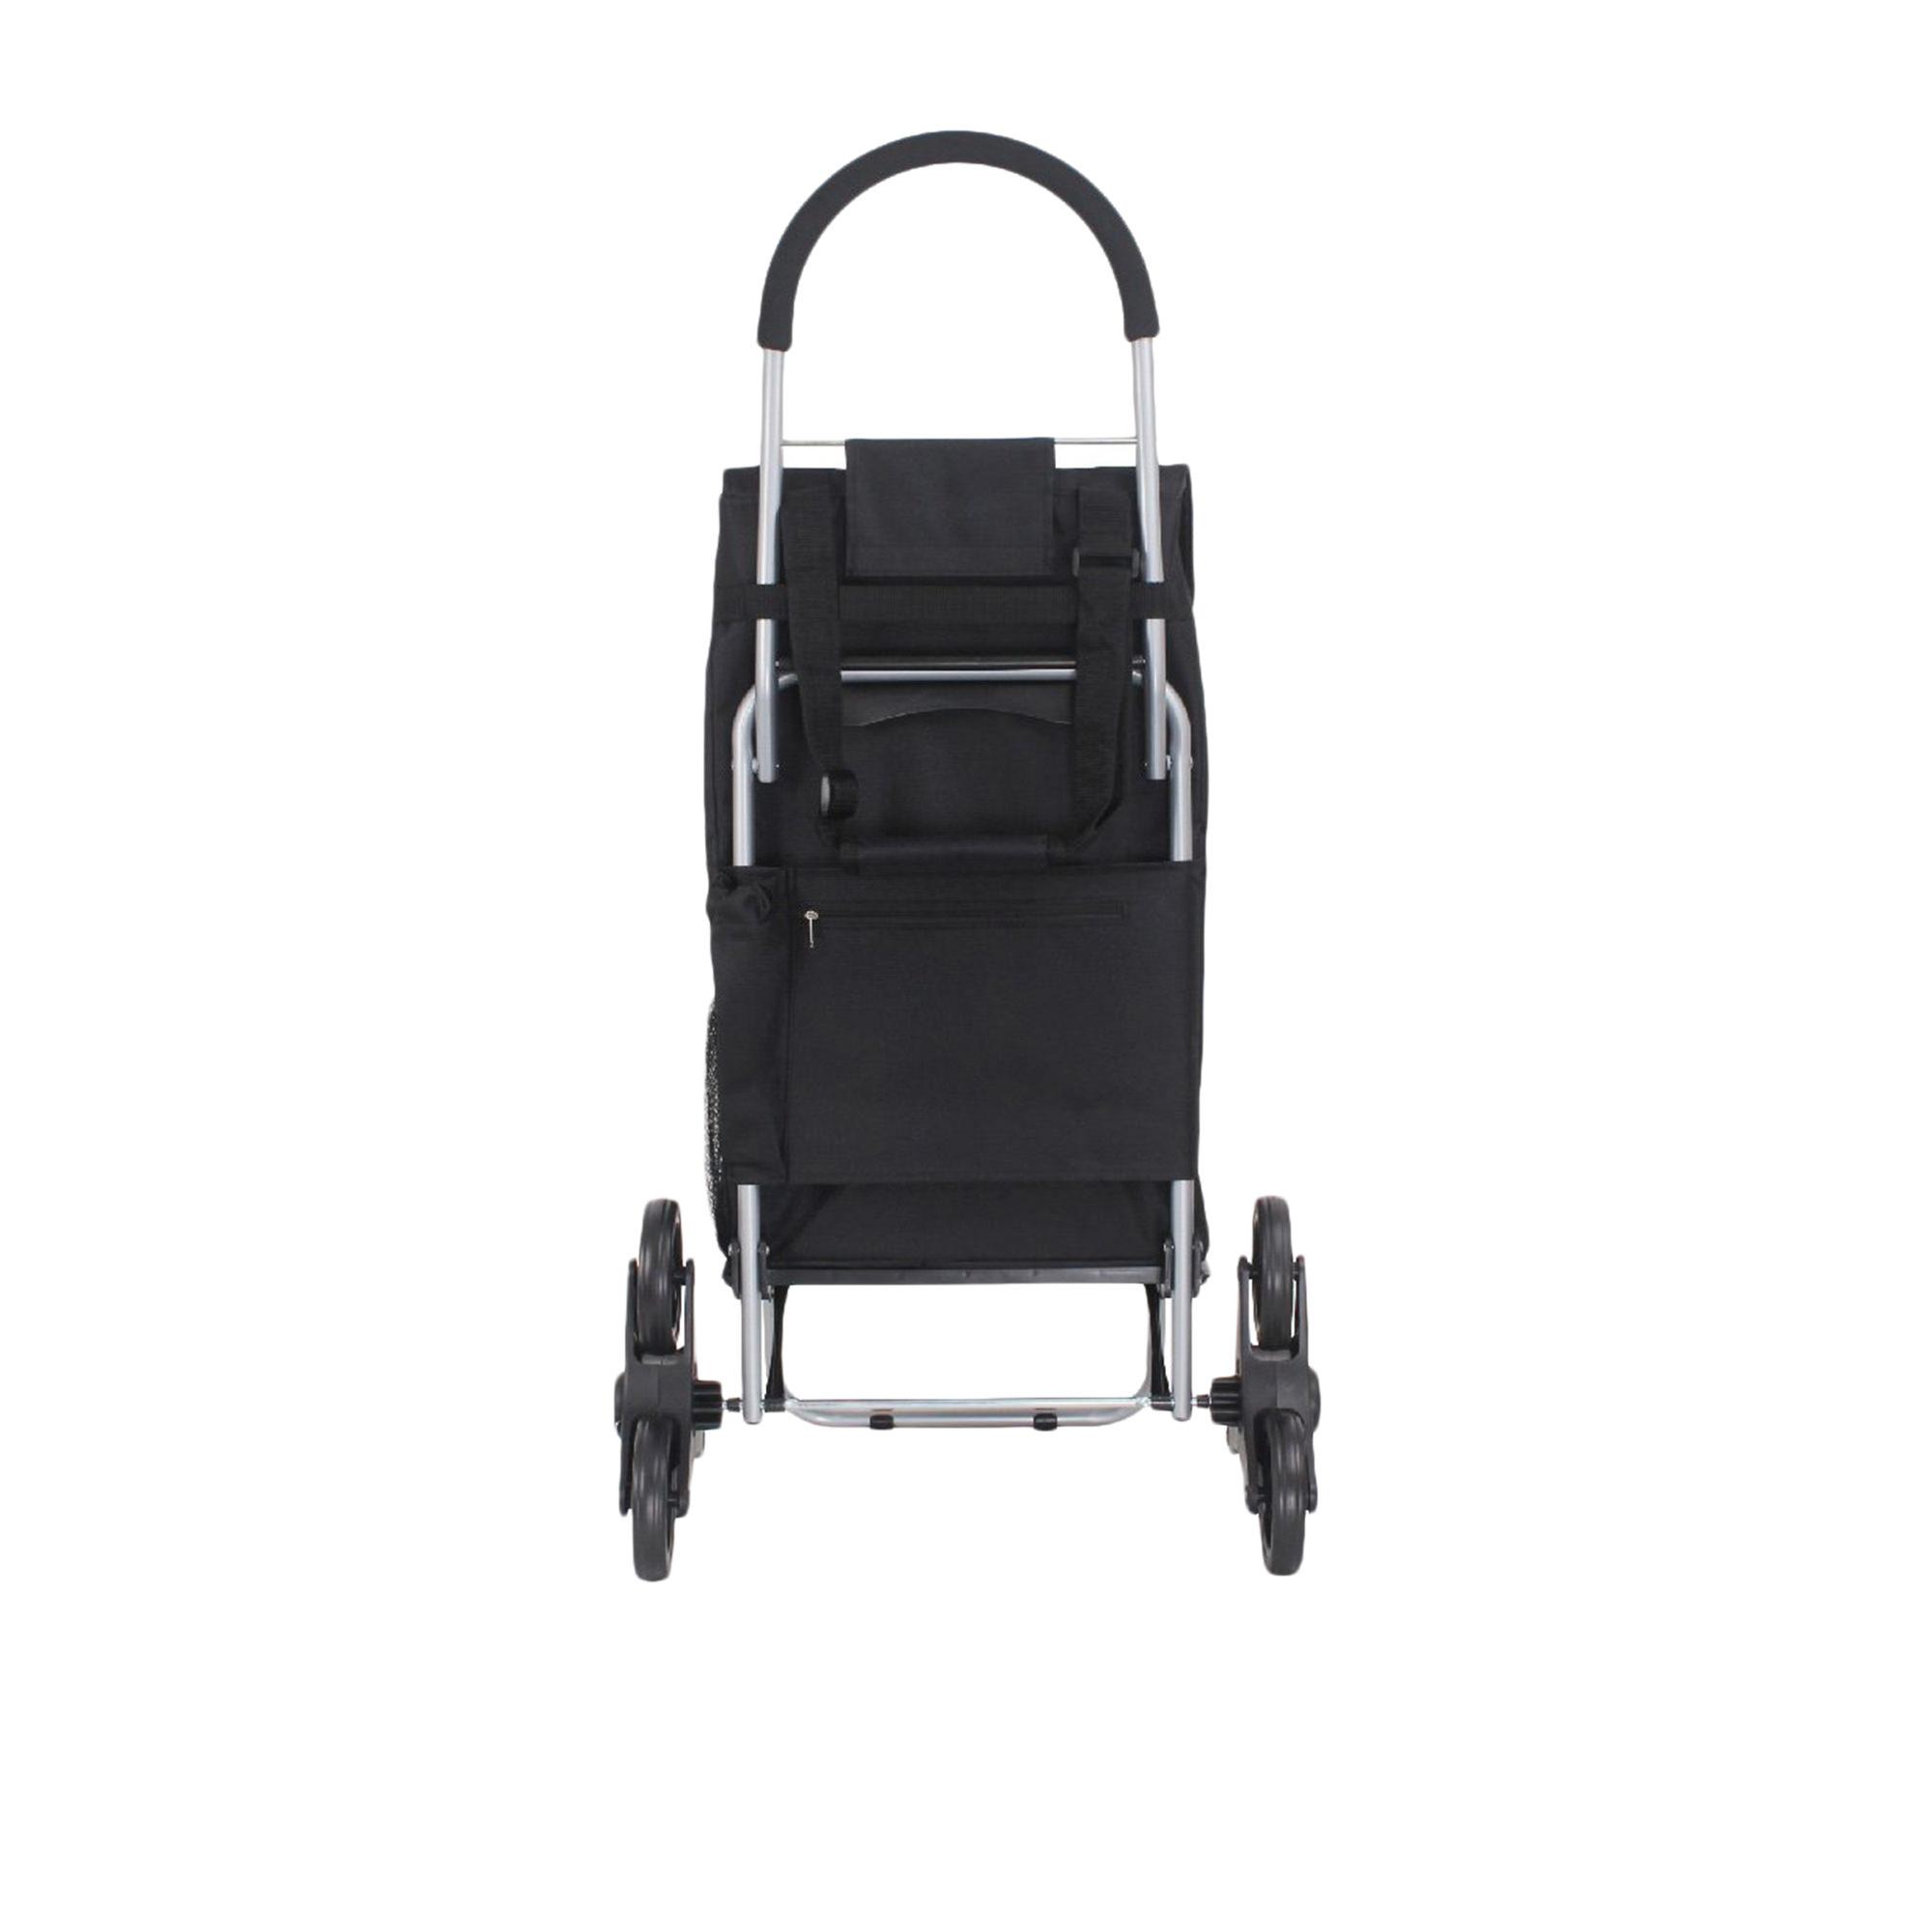 White Magic Handy Trolley with Climbing Wheels Black Image 4